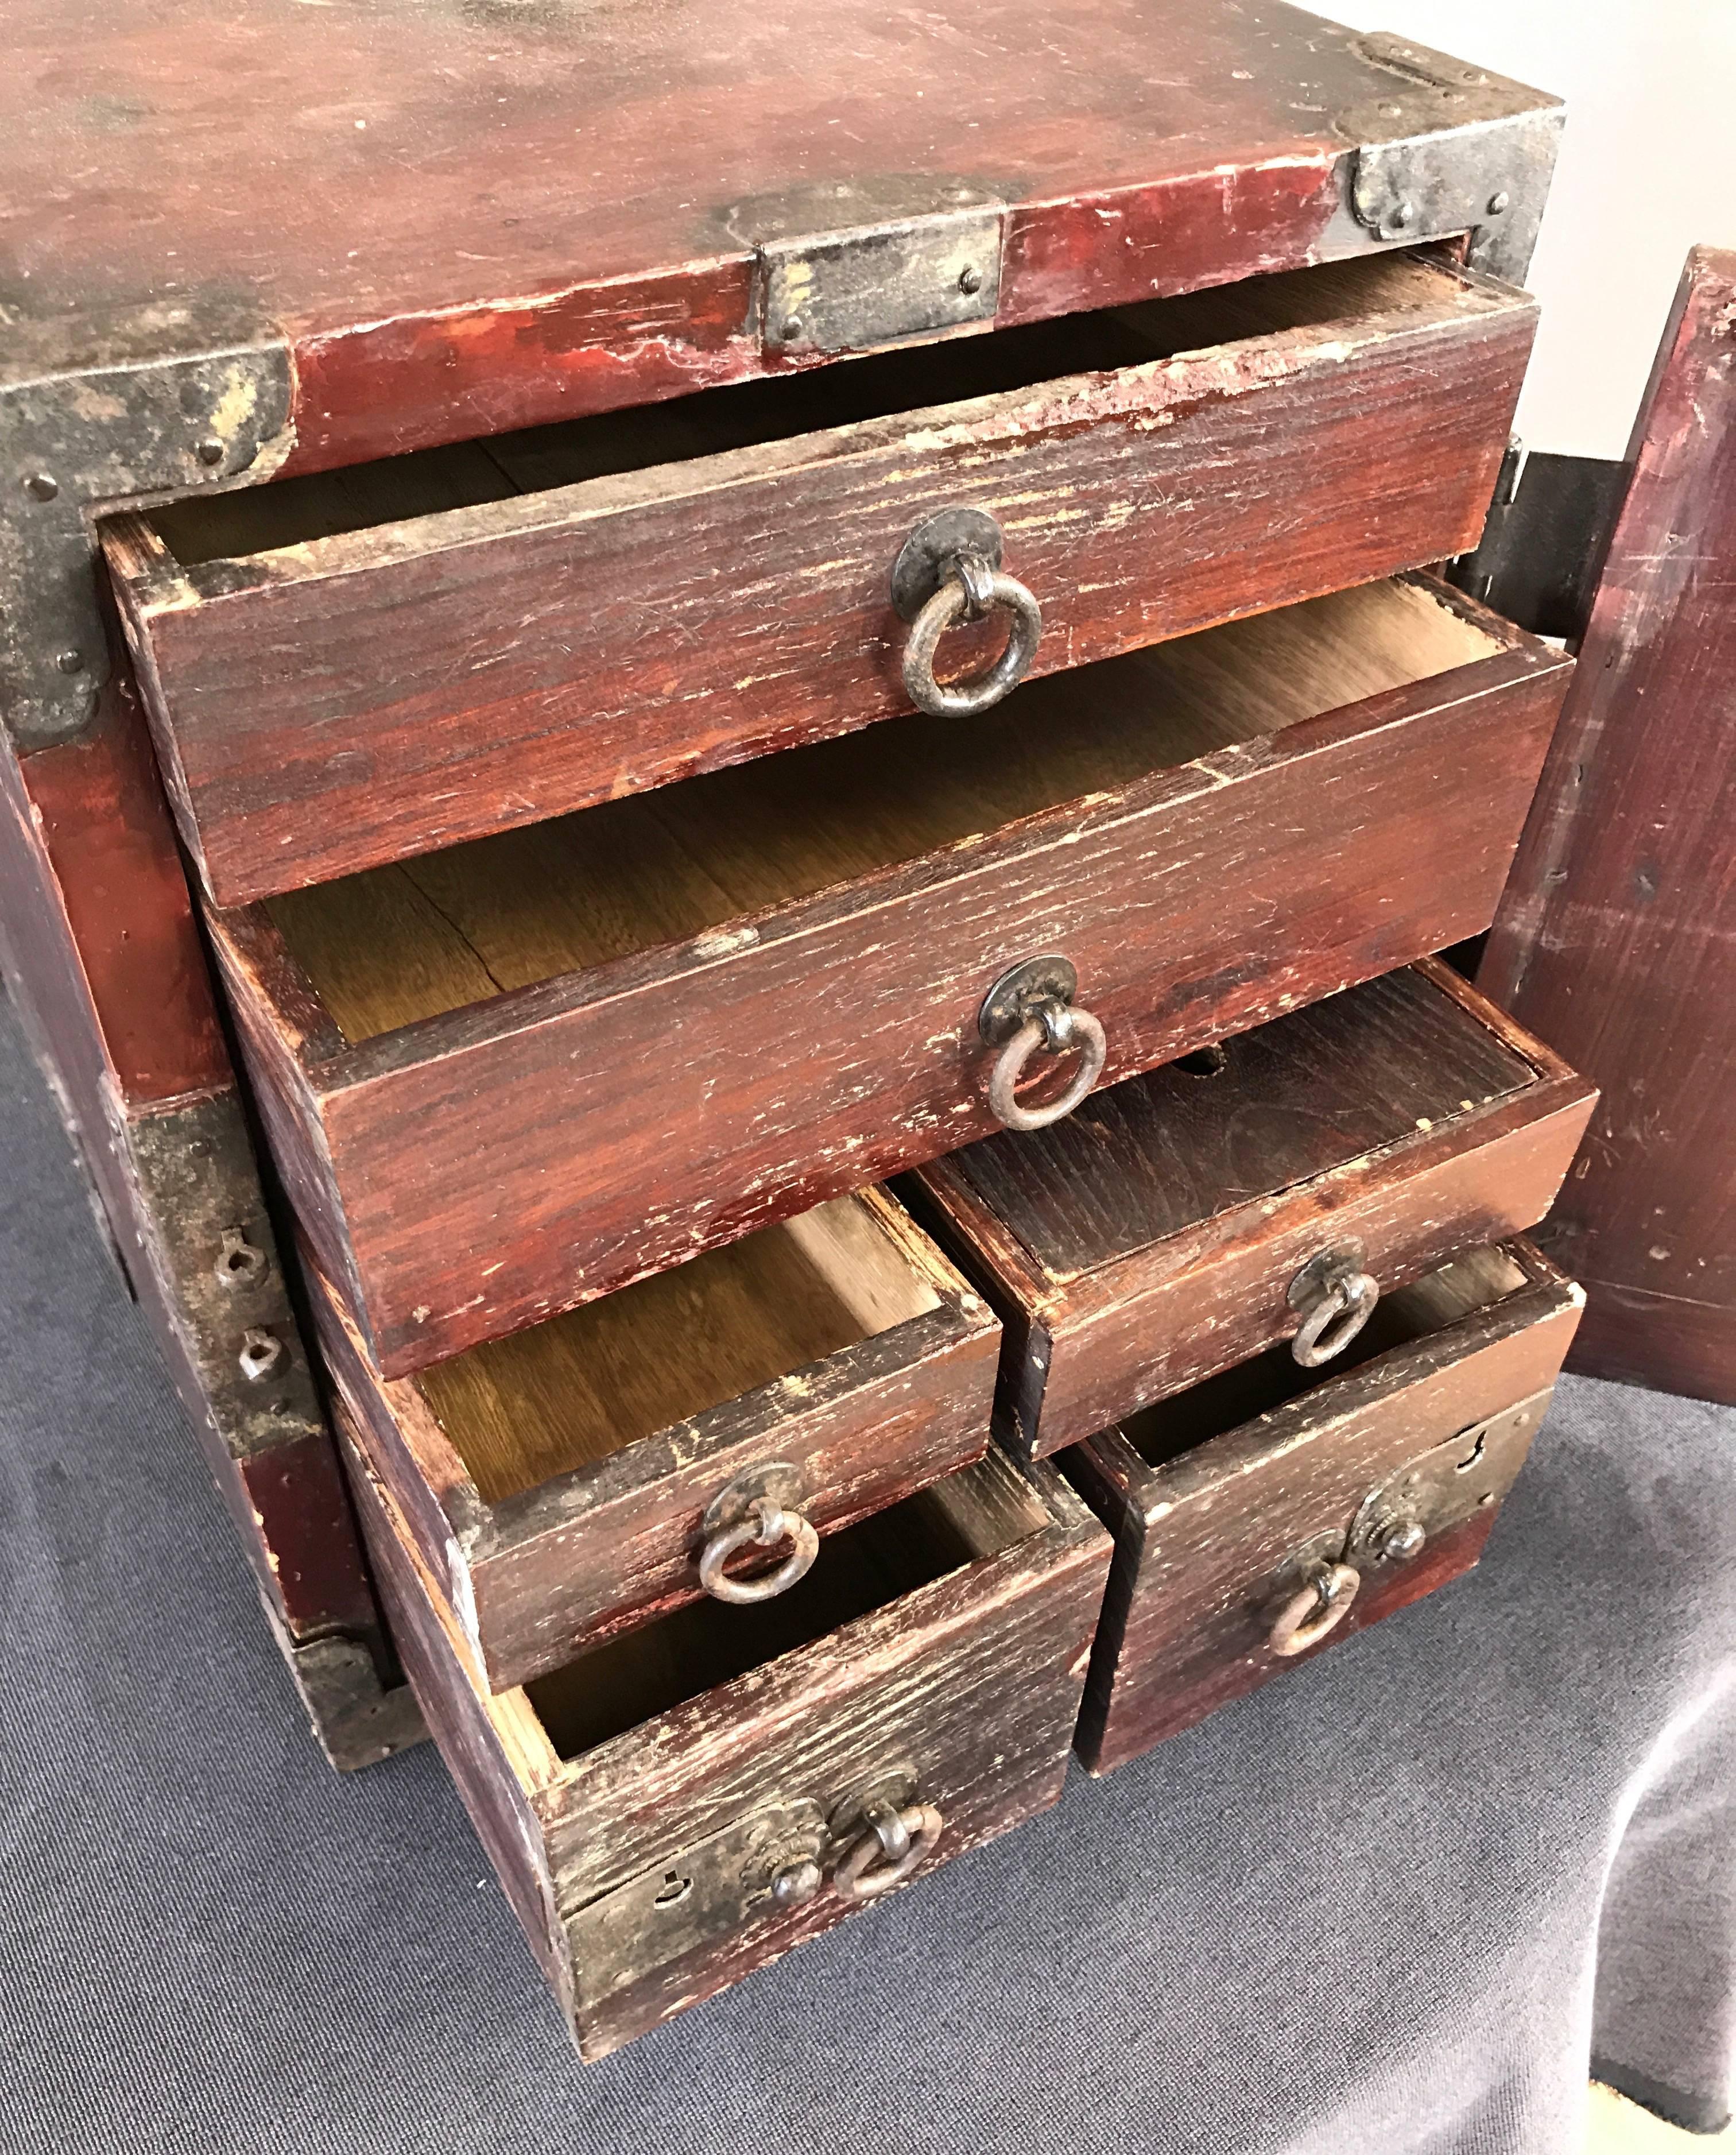 Antique Compact Chinese Seaman’s Chest with Locks and Key 4